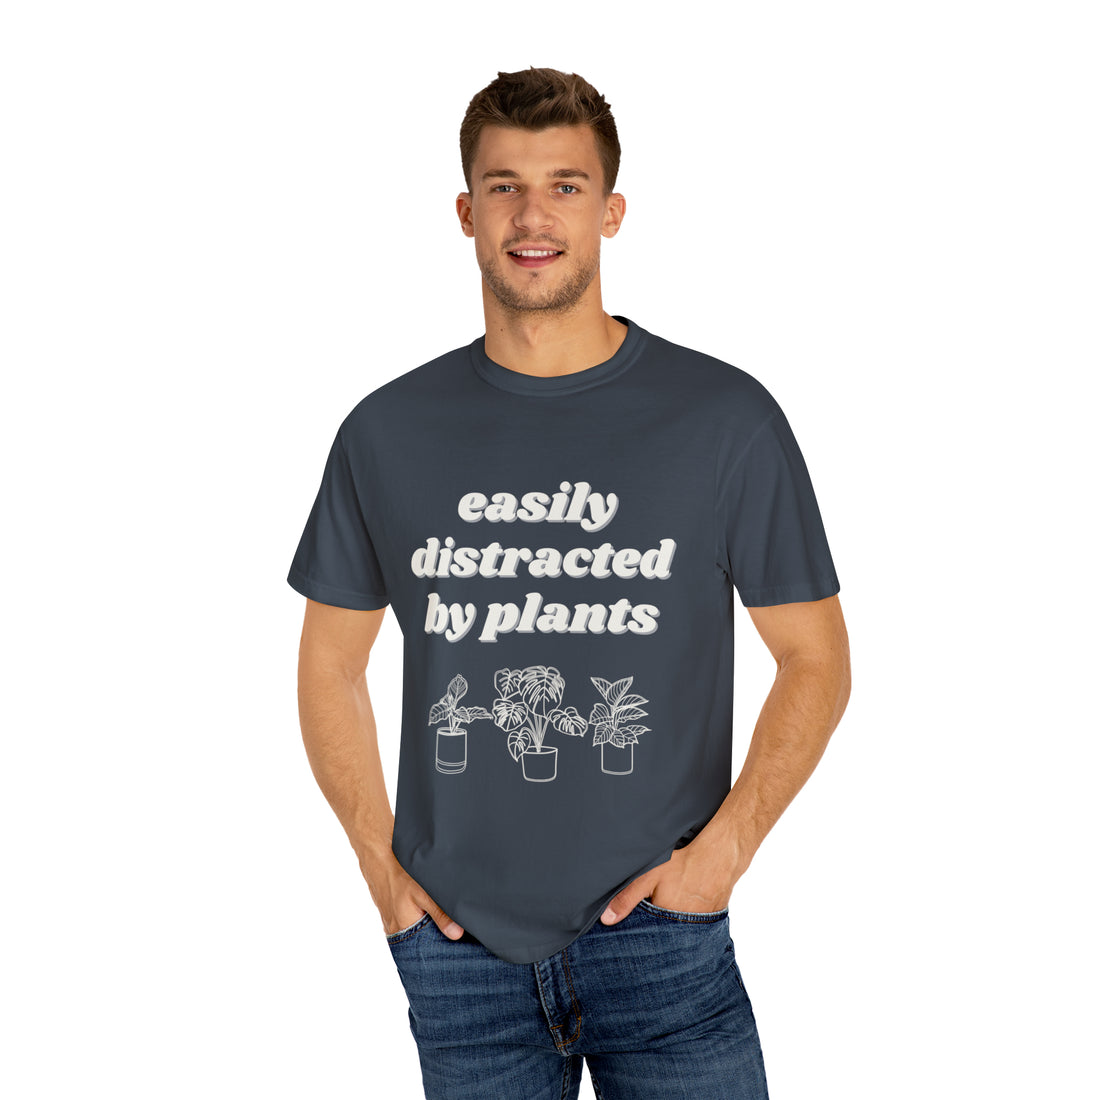 easily distracted by plants - Comfort Colors T-Shirt - Hive Plants - T-Shirt